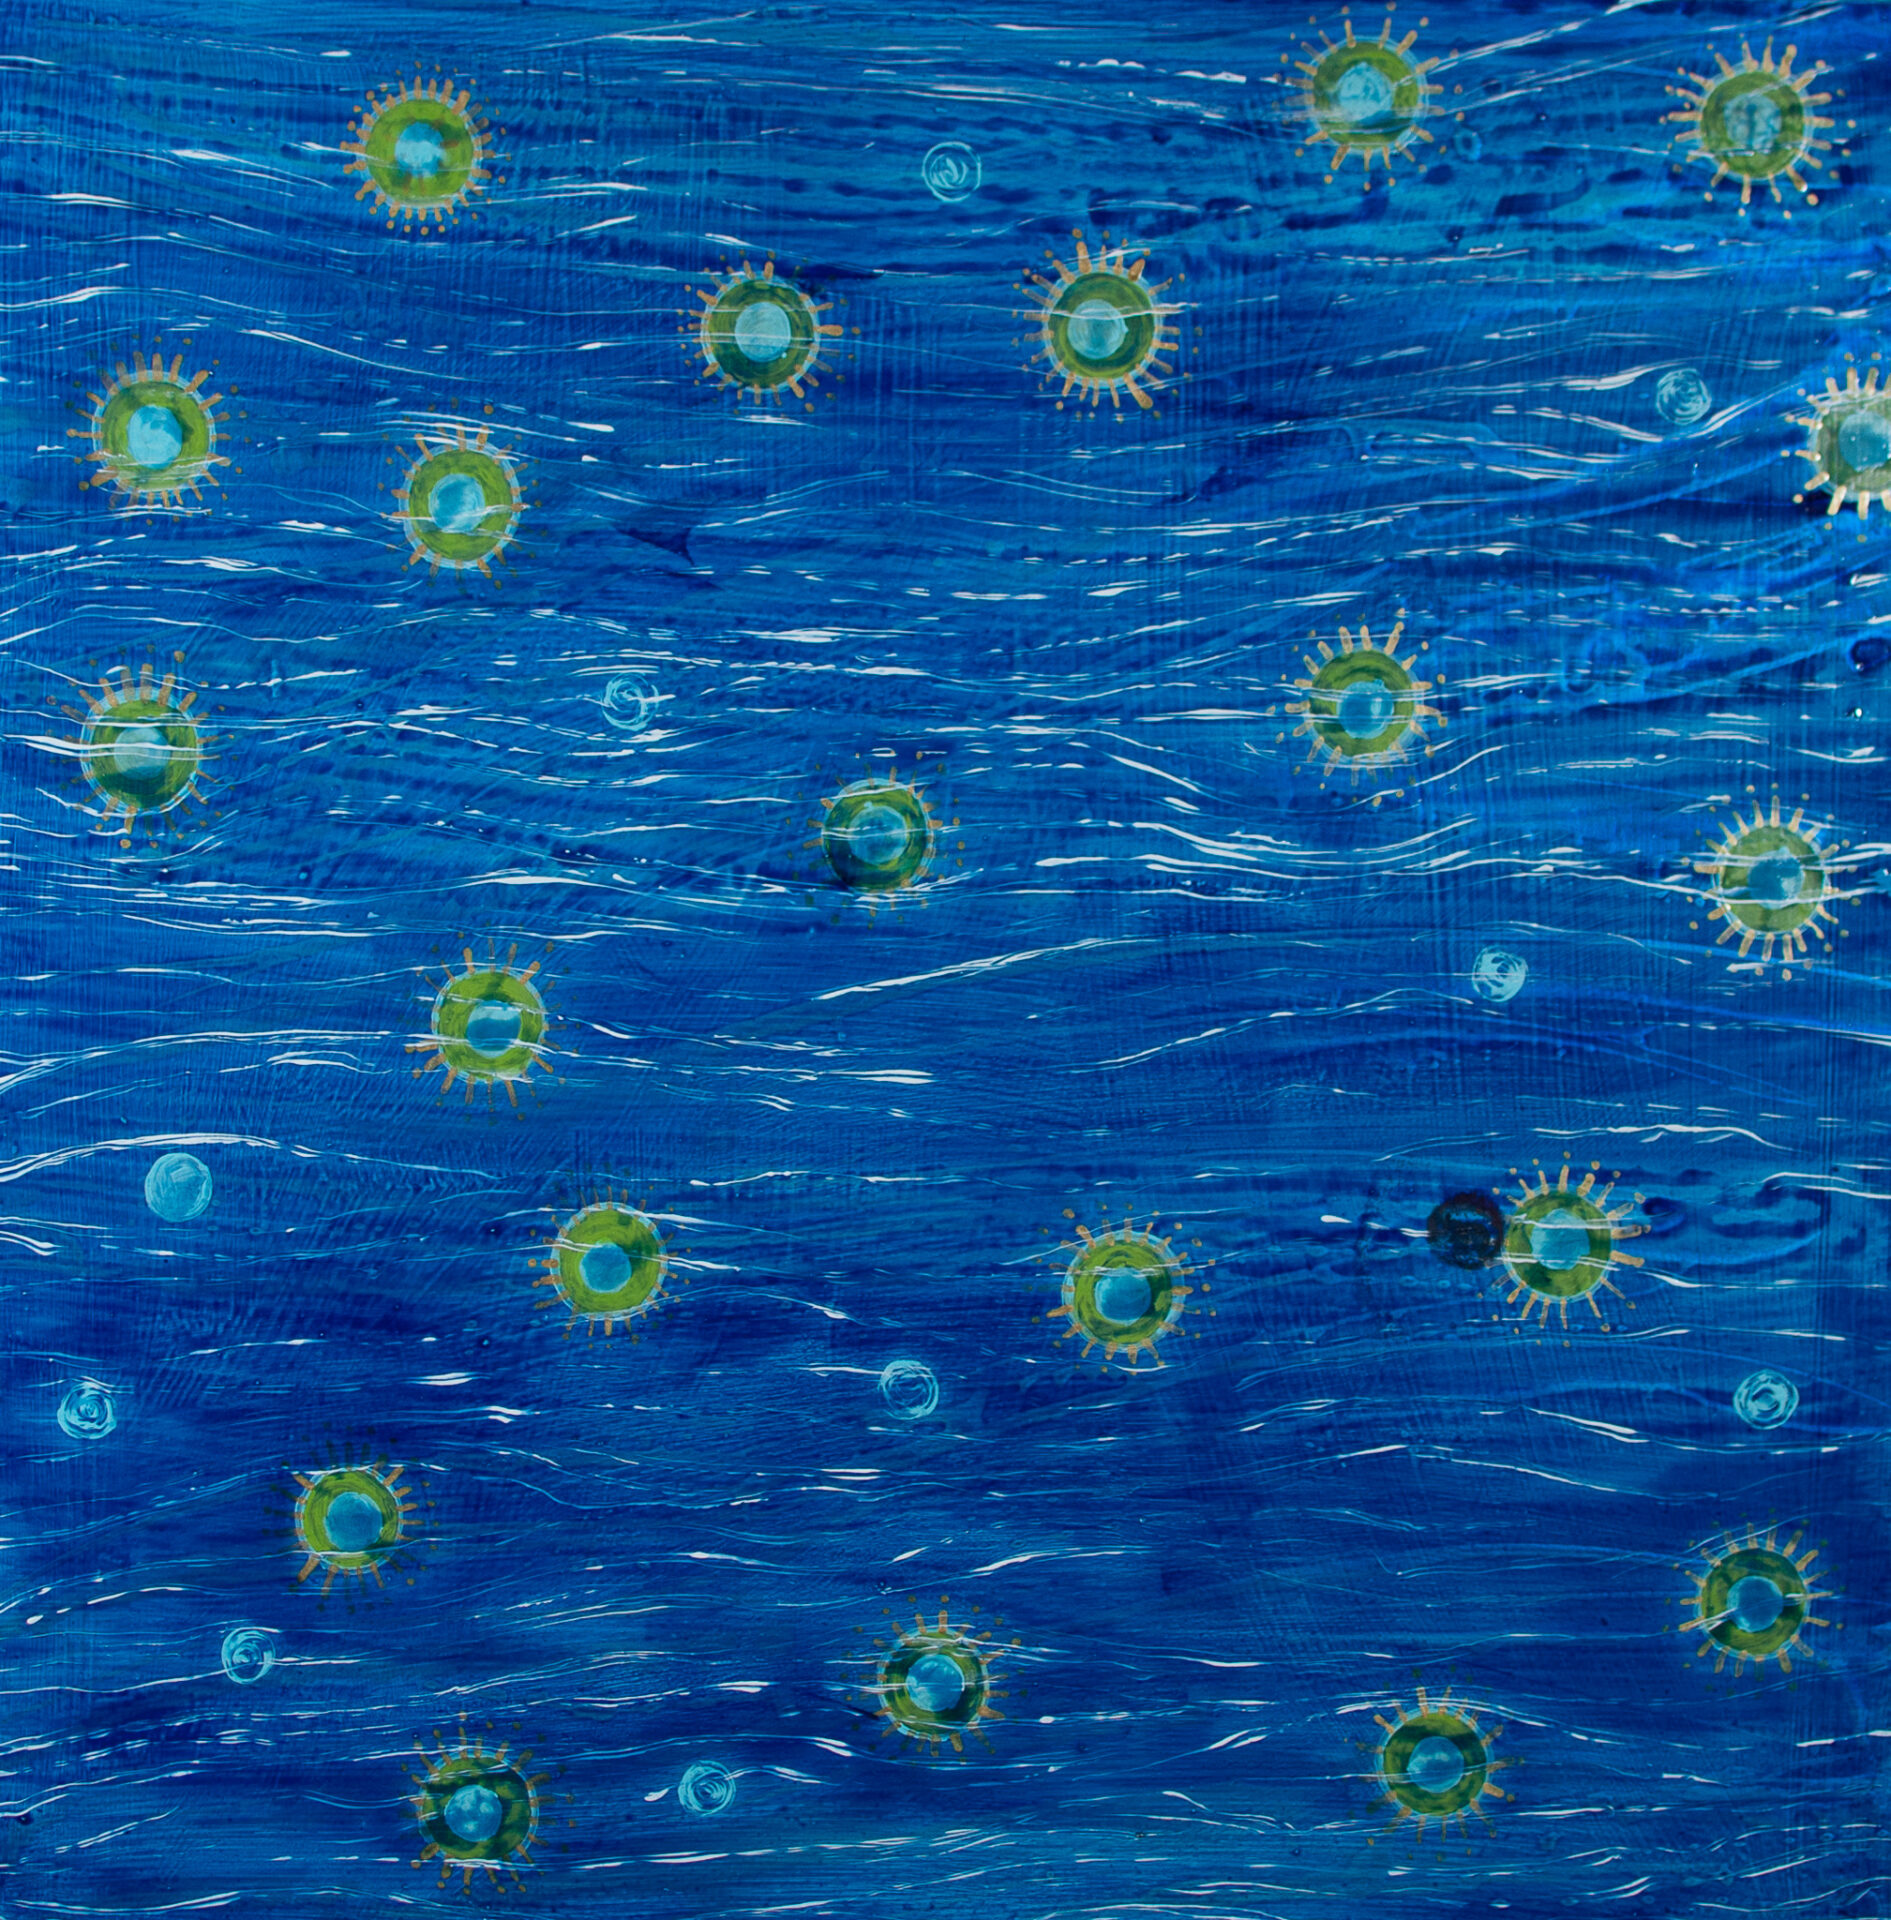 Painting with a blue background, white lines, and green circles